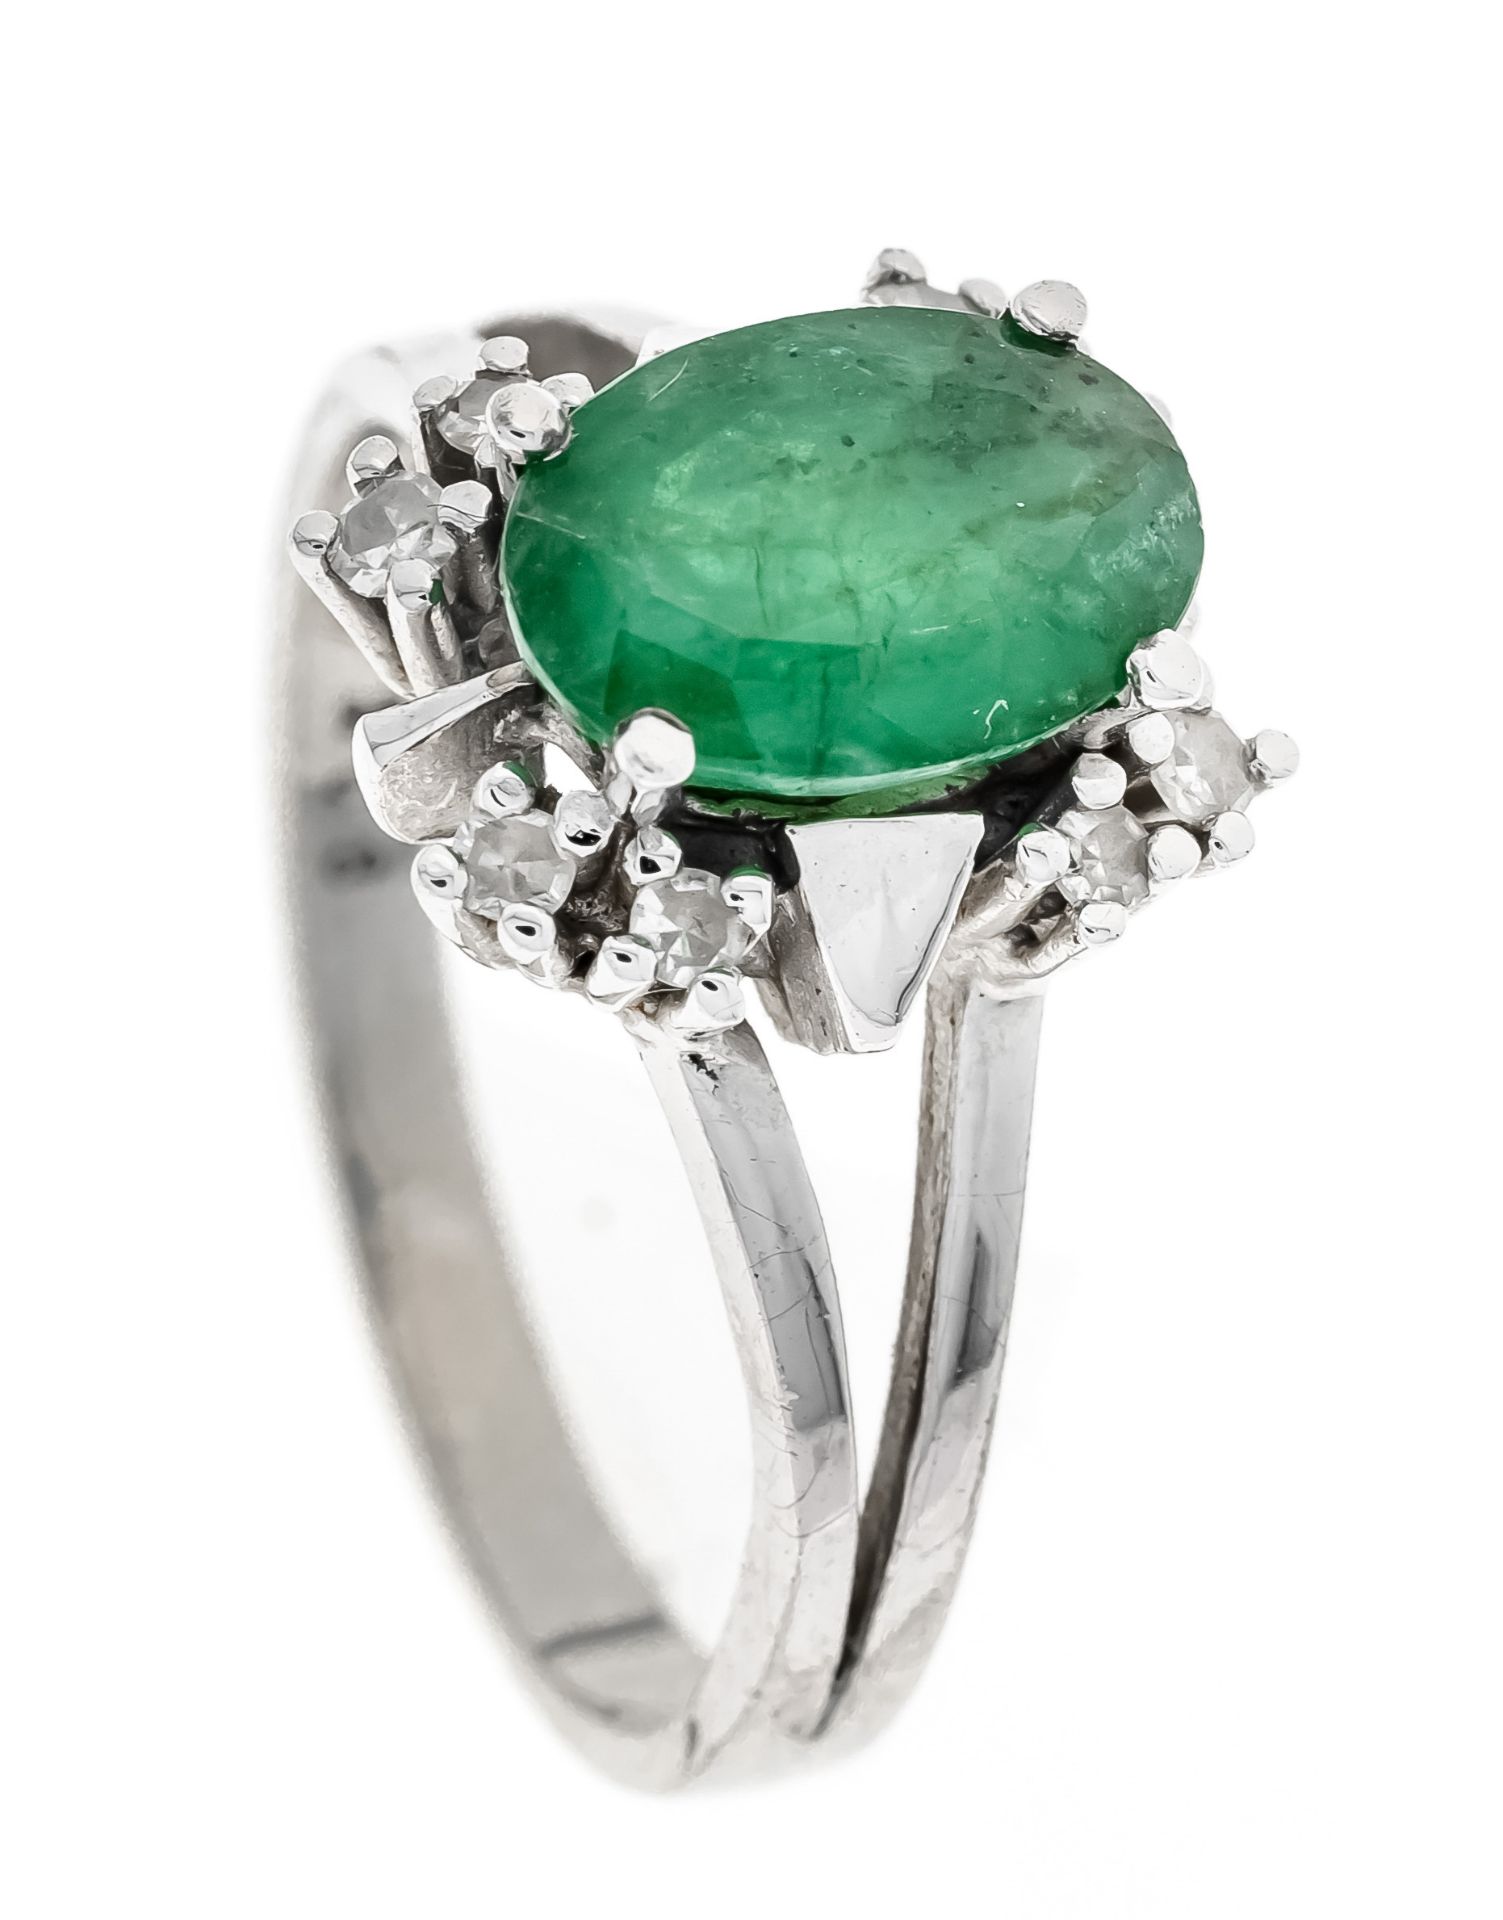 Emerald diamond ring WG 585/000 with one oval faceted emerald 9,7 x 6,7 mm, green, translucent,